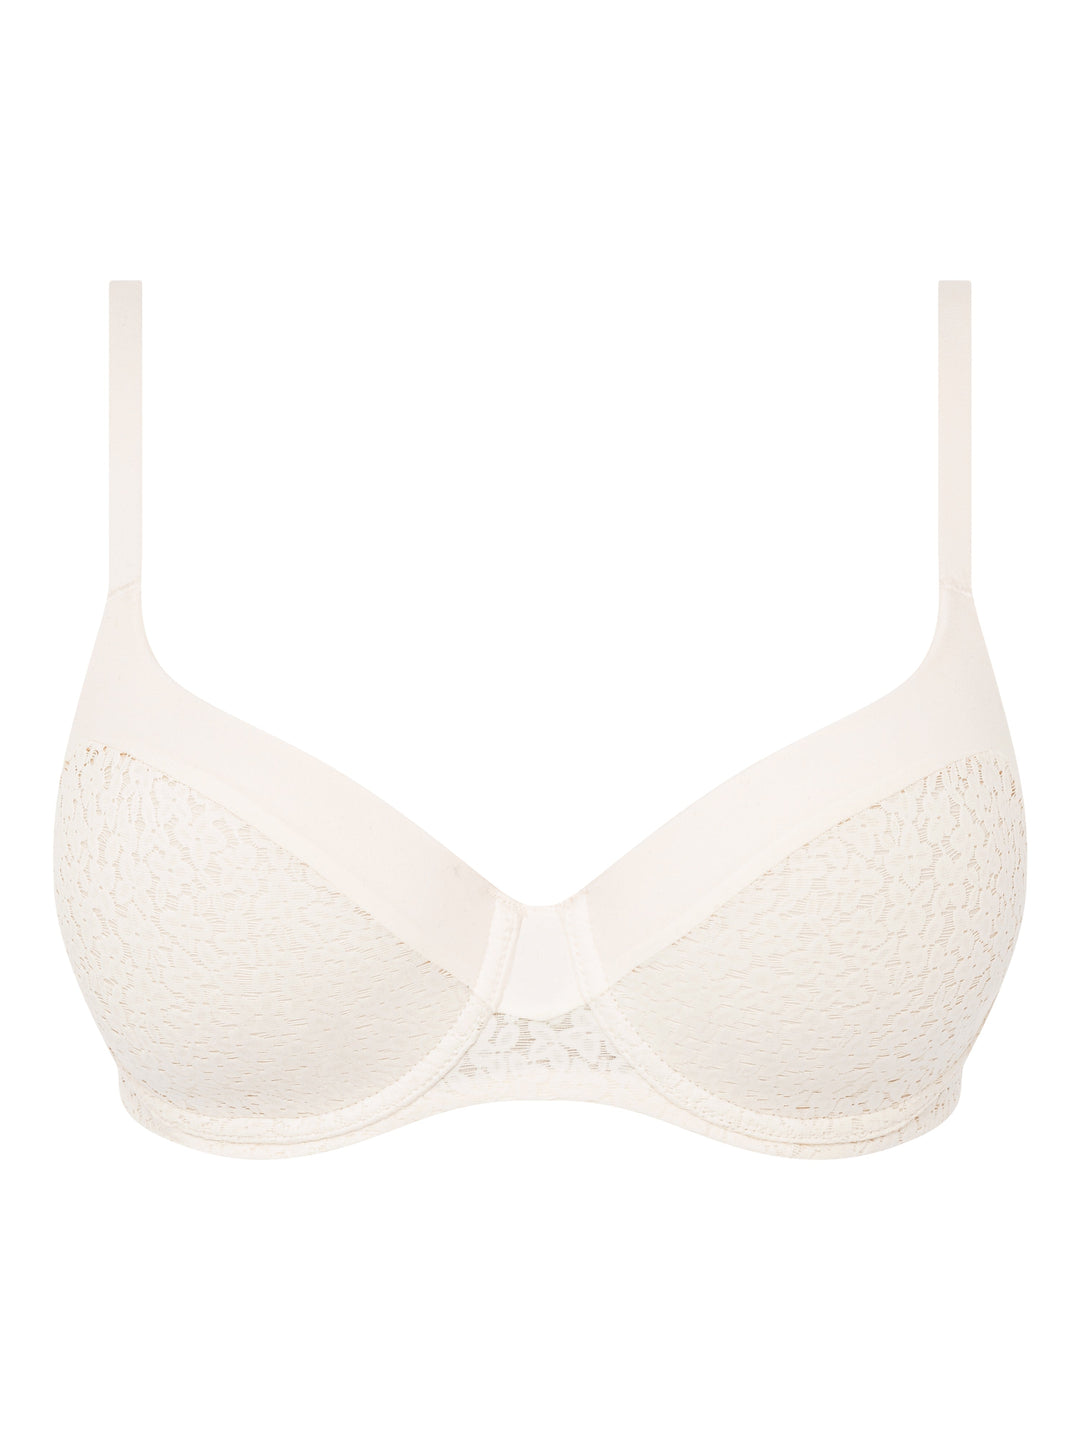 Chantelle Norah Underwired Covering Bra - Pearl Full Cup Bra Chantelle 